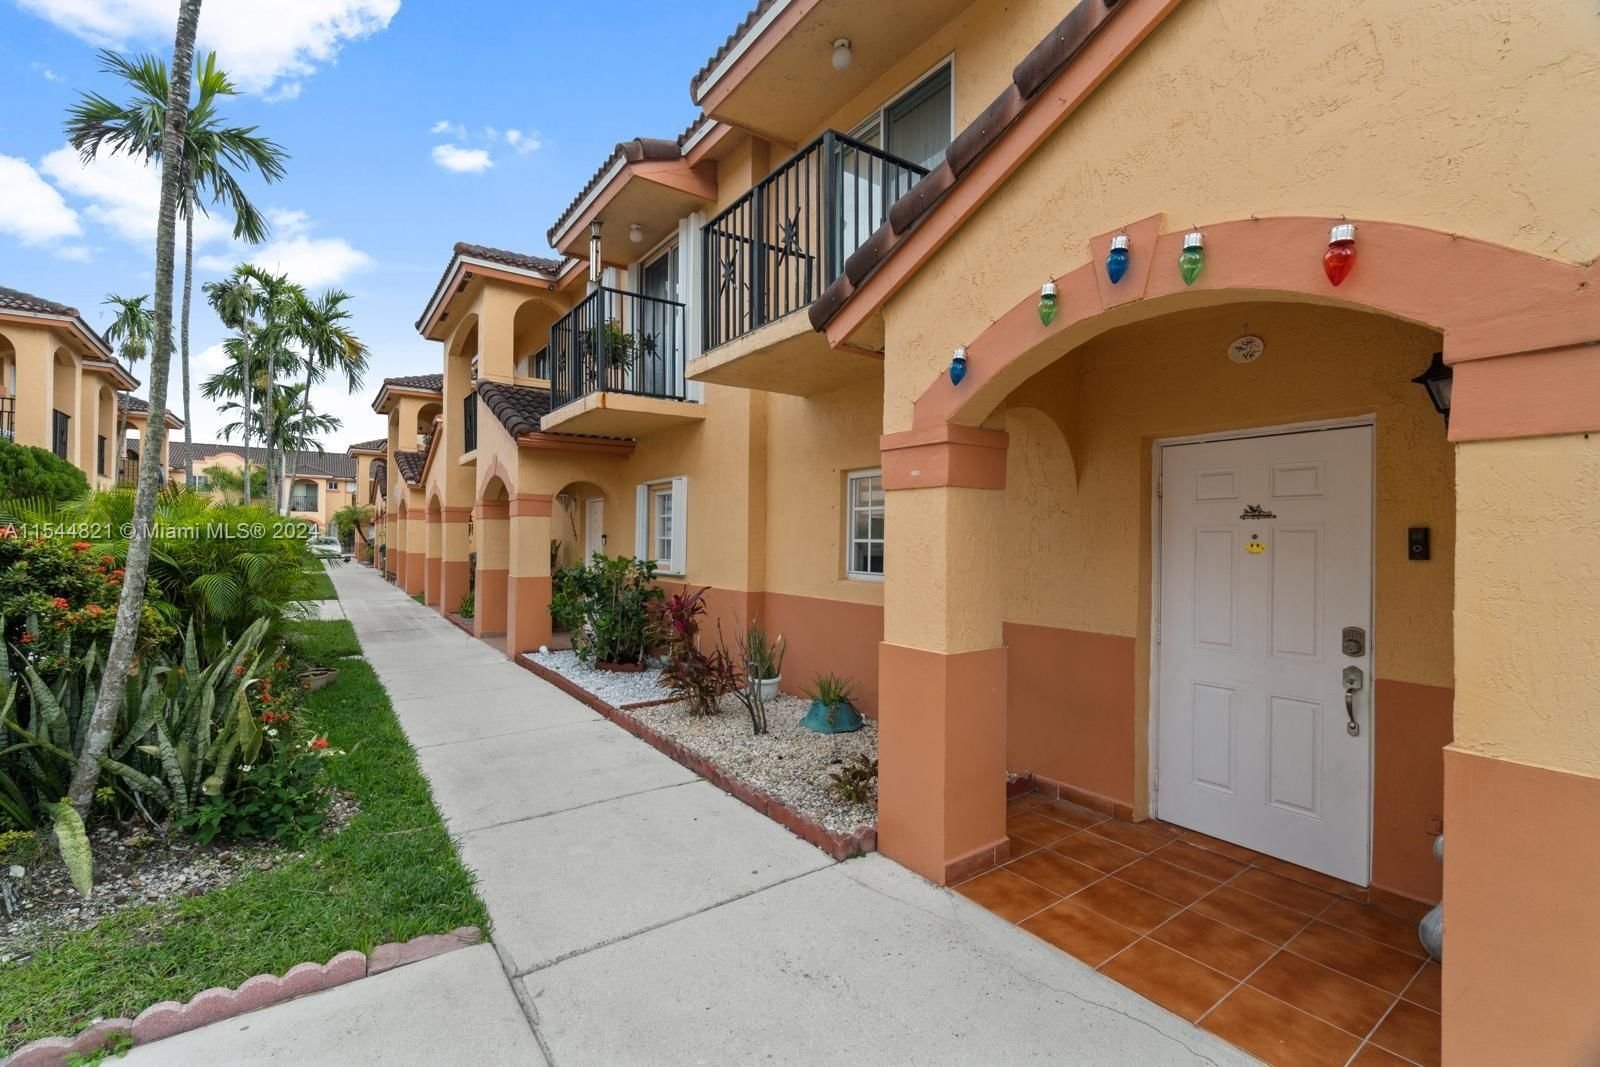 Real estate property located at 10684 87th Ct #10684, Miami-Dade County, GARDENGATE TOWNHOMES I CO, Hialeah Gardens, FL